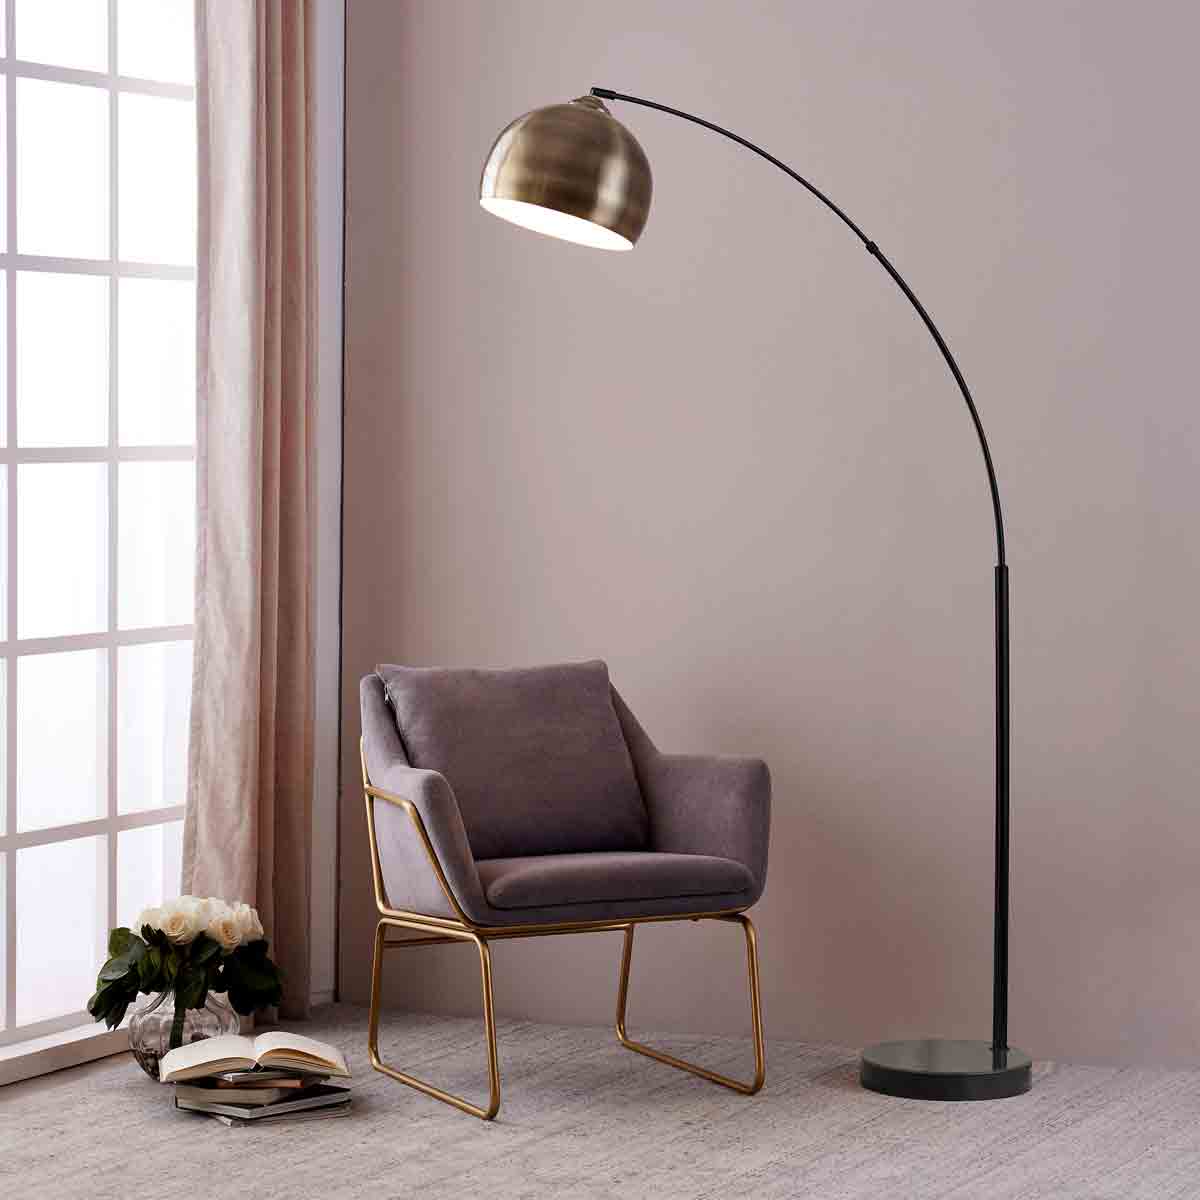 Teamson Home Arc Floor Lamp With Marble Base Antique Brass Finished Shade Vn-l00010Ab-UK